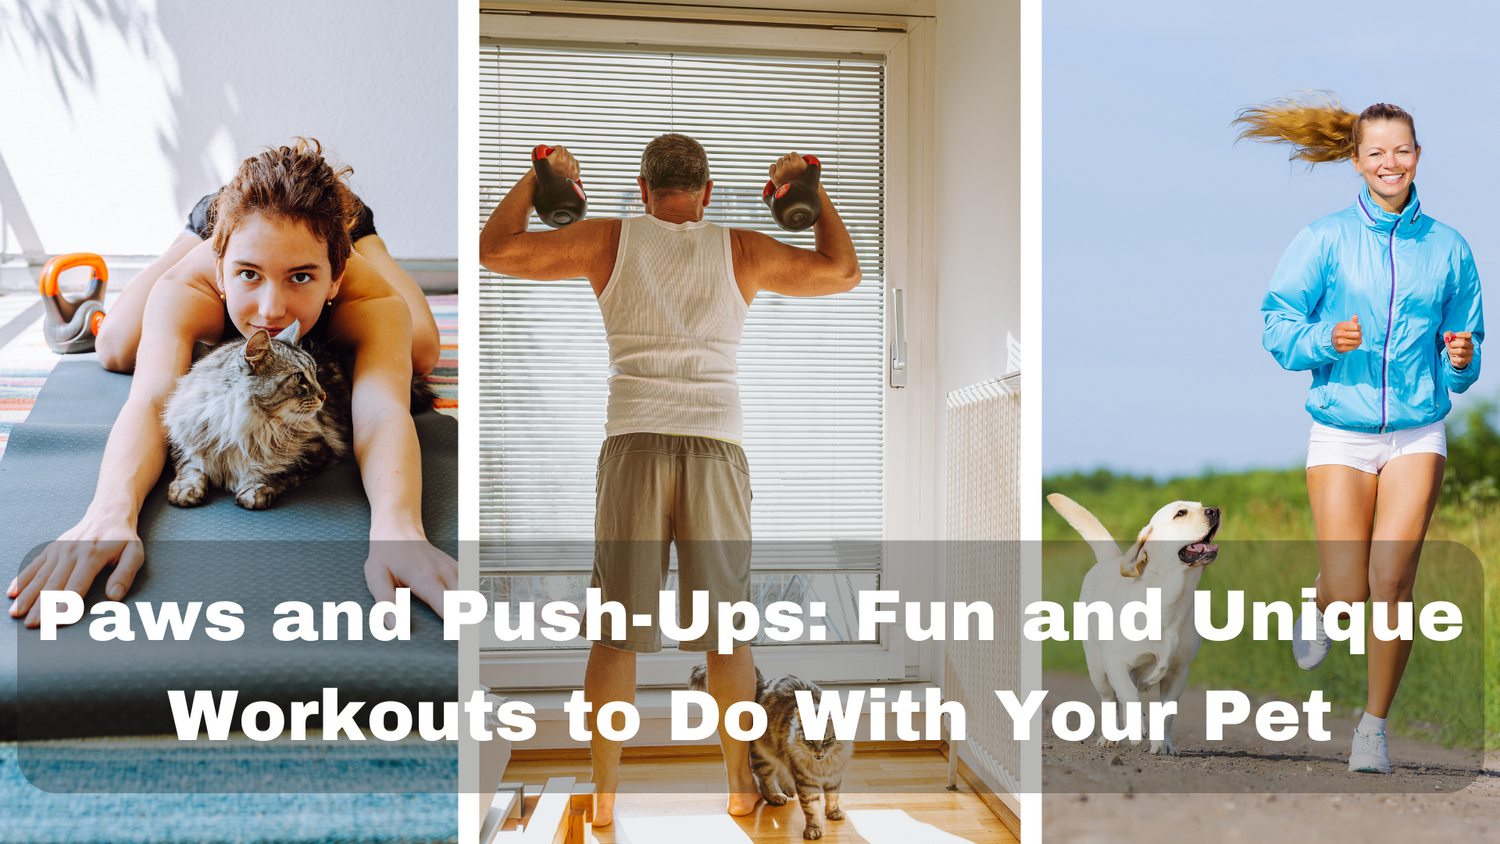 Paws and Push-Ups: Fun and Unique Workouts to Do With Your Pet